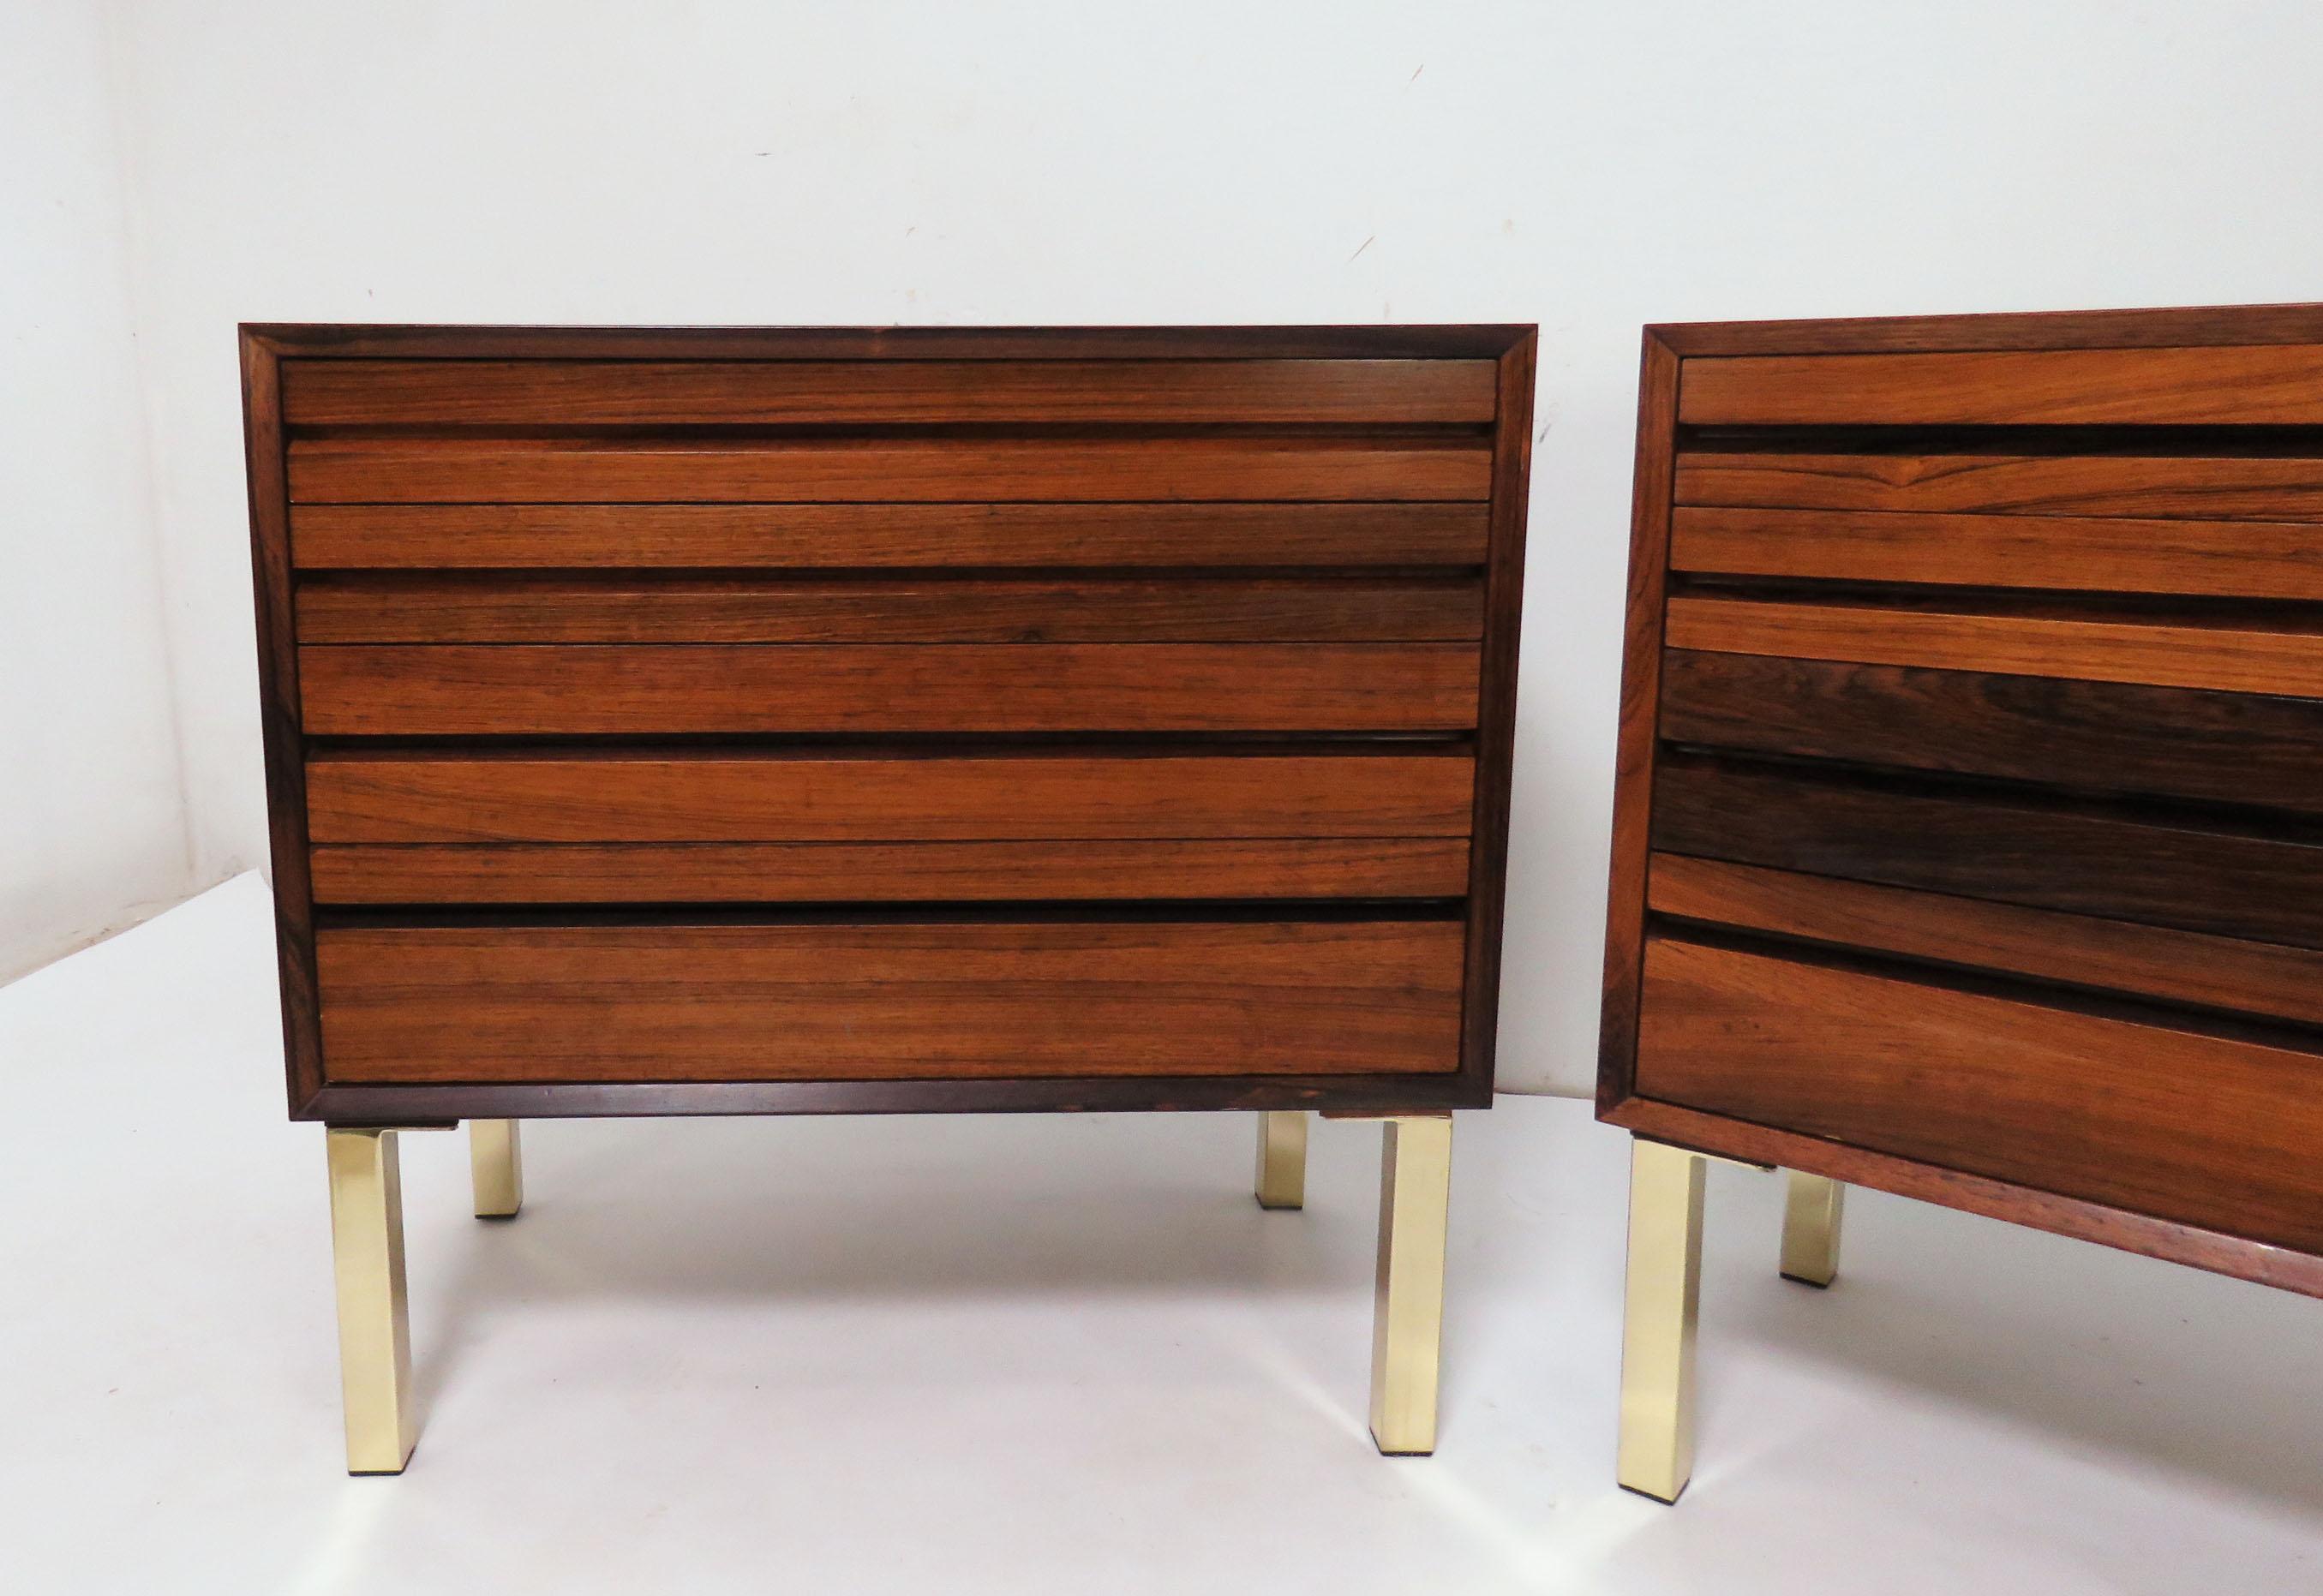 A pair of Danish rosewood Cado unit wall cabinets, mounted with aftermarket brass legs as a splendid pair of four drawer chests.

18 1/8